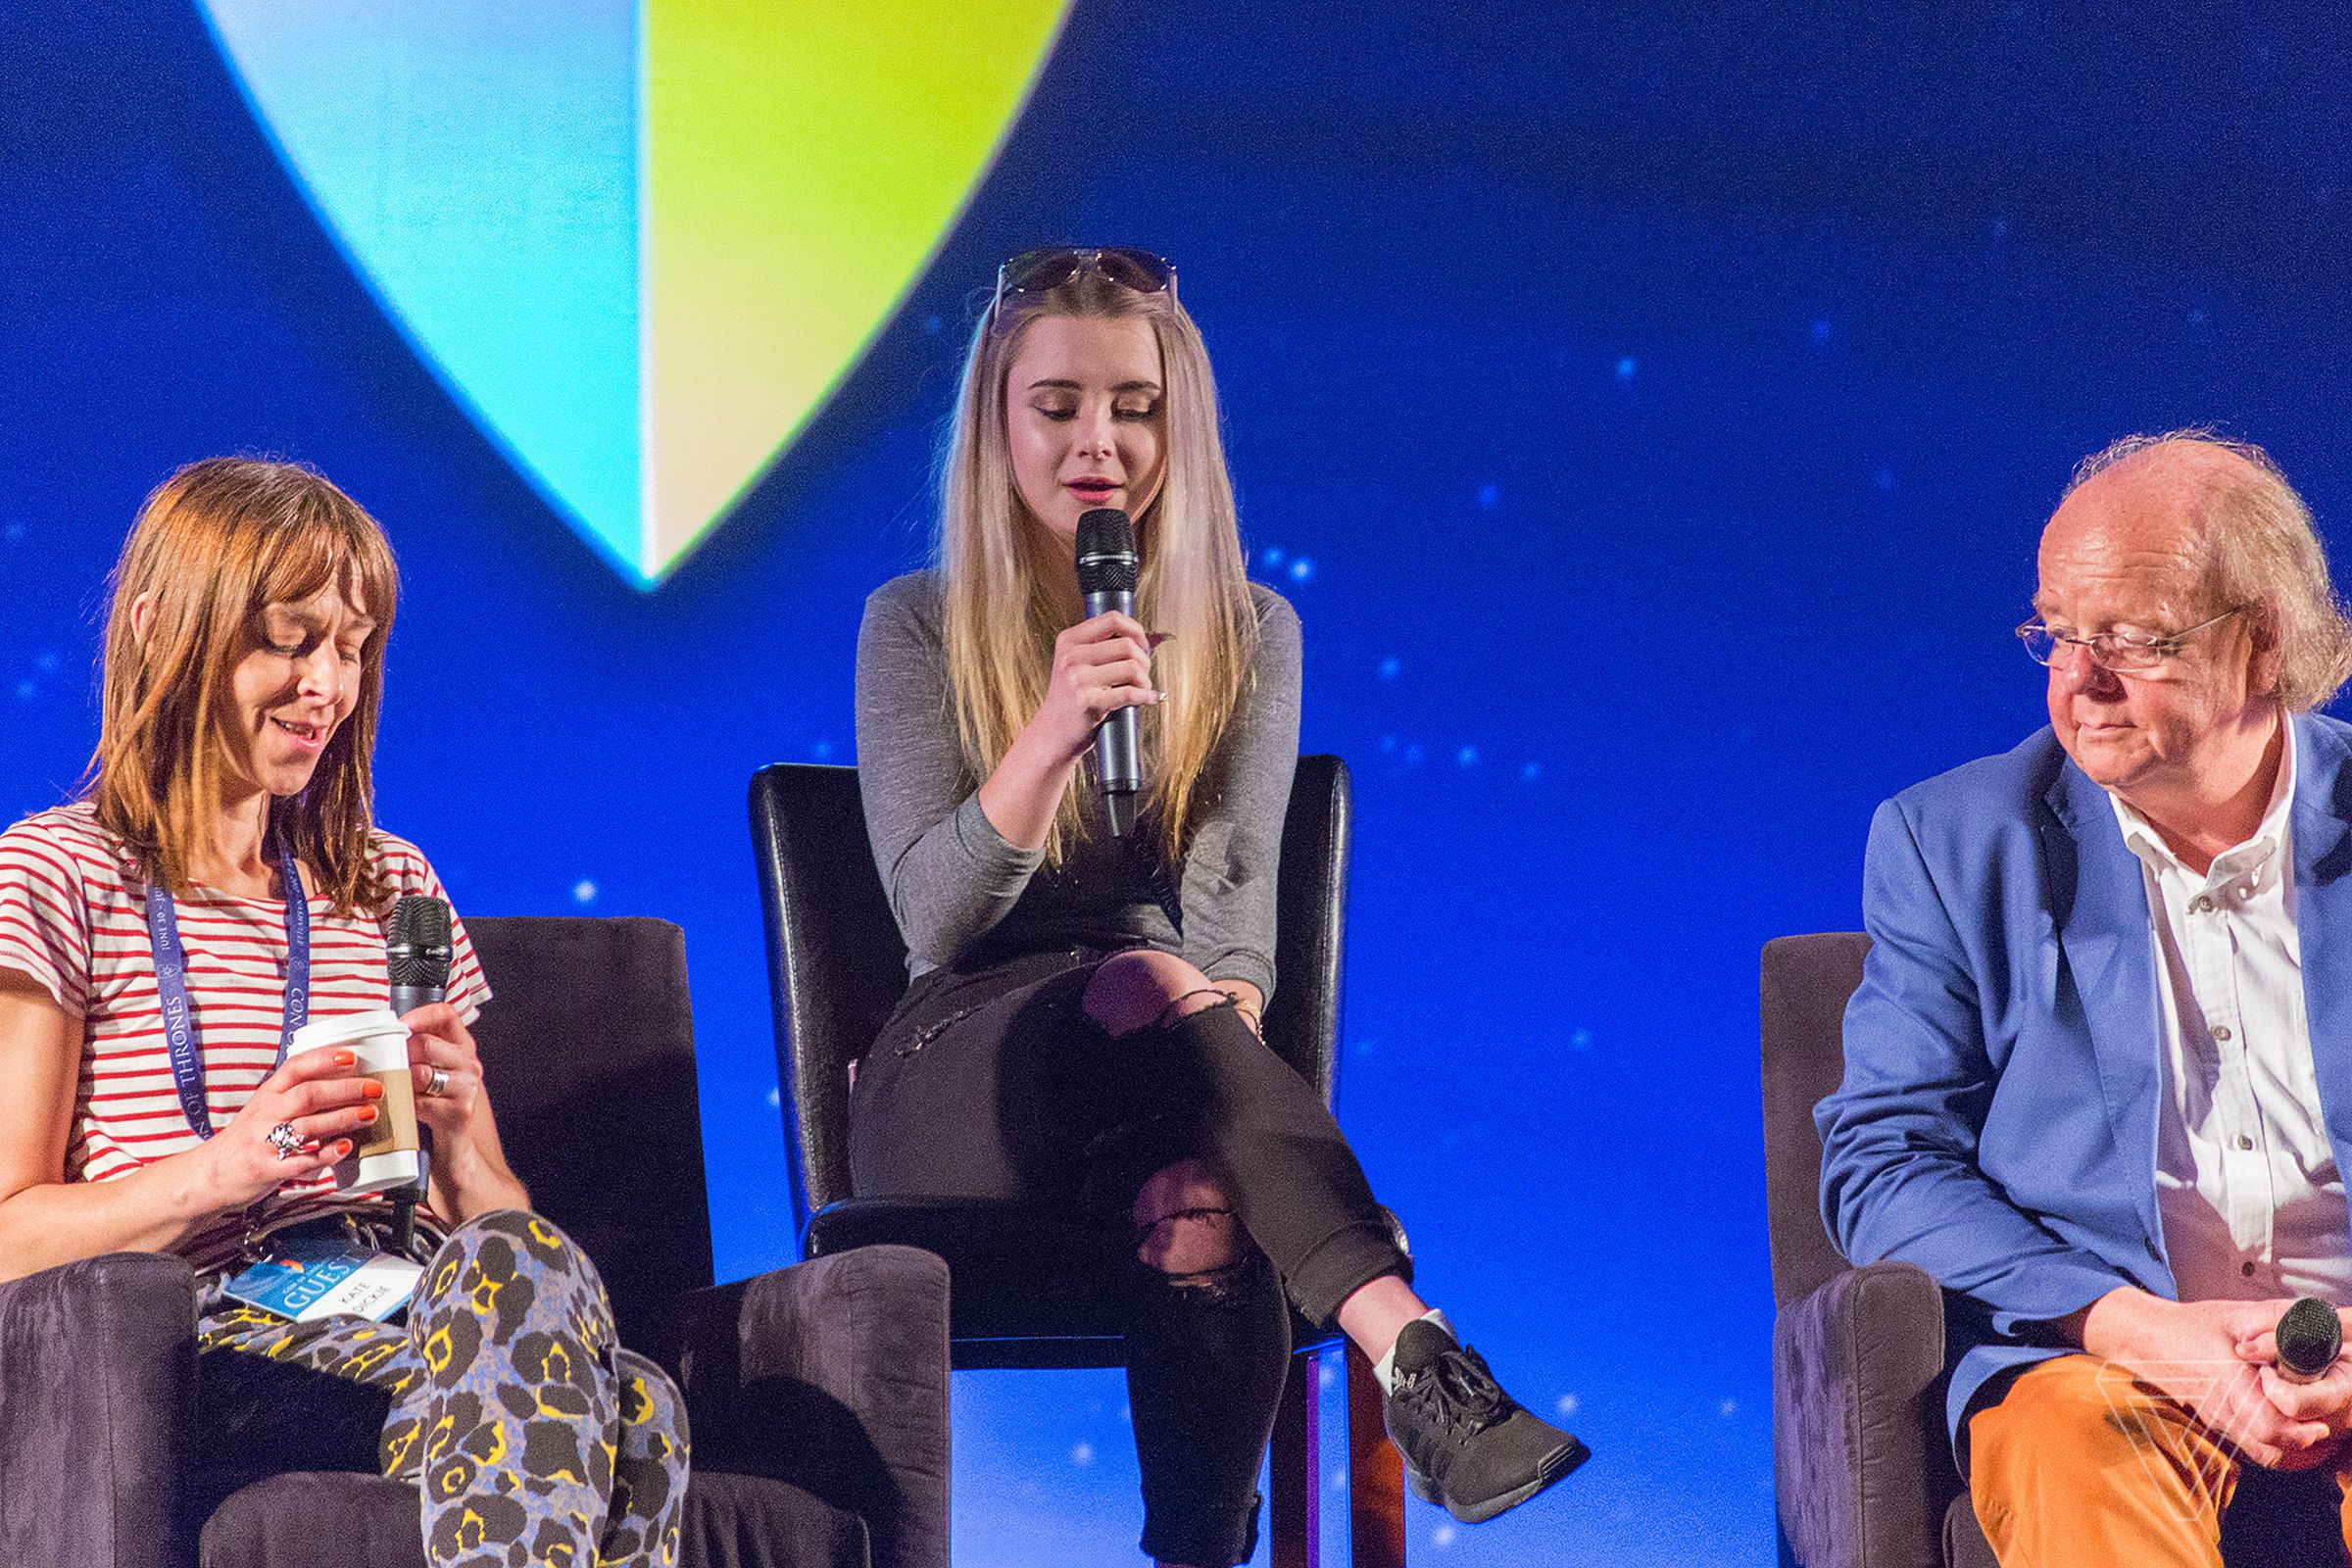 Kate Dickie, Kerry Ingram And Roger Ashton-Griffiths on the Dead Characters ‘ panel at Con of Thrones.